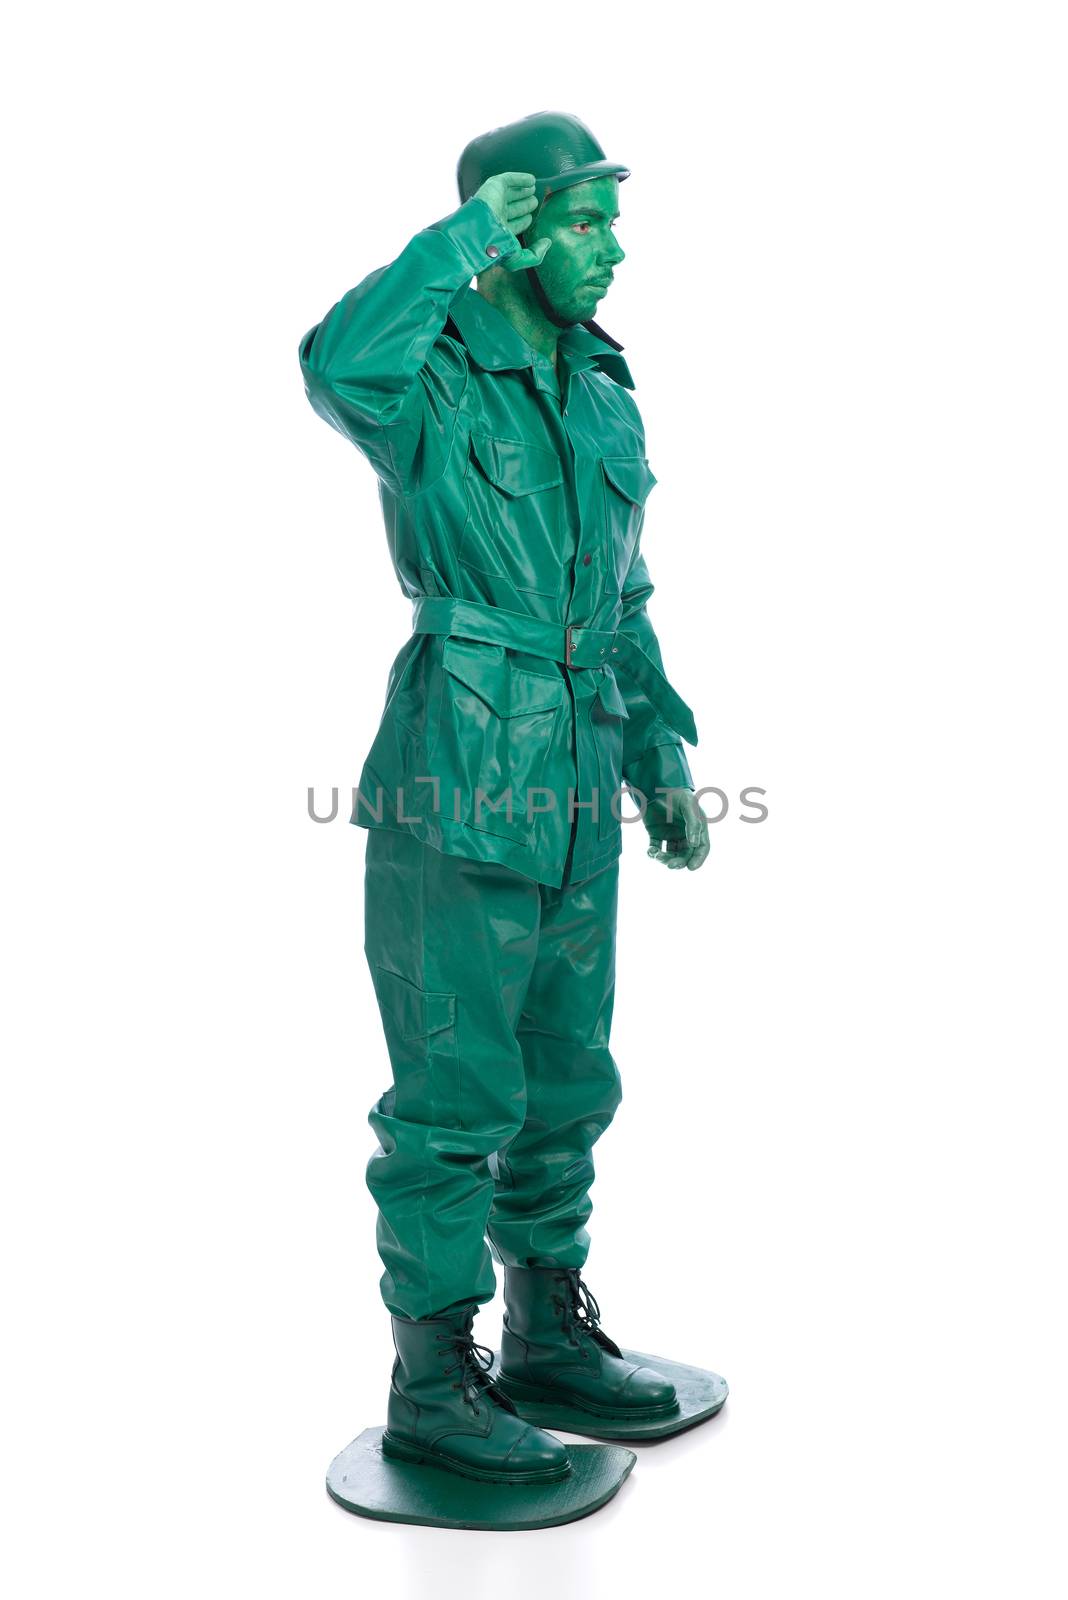 Man on a green toy soldier costume saluting isolated on white background.